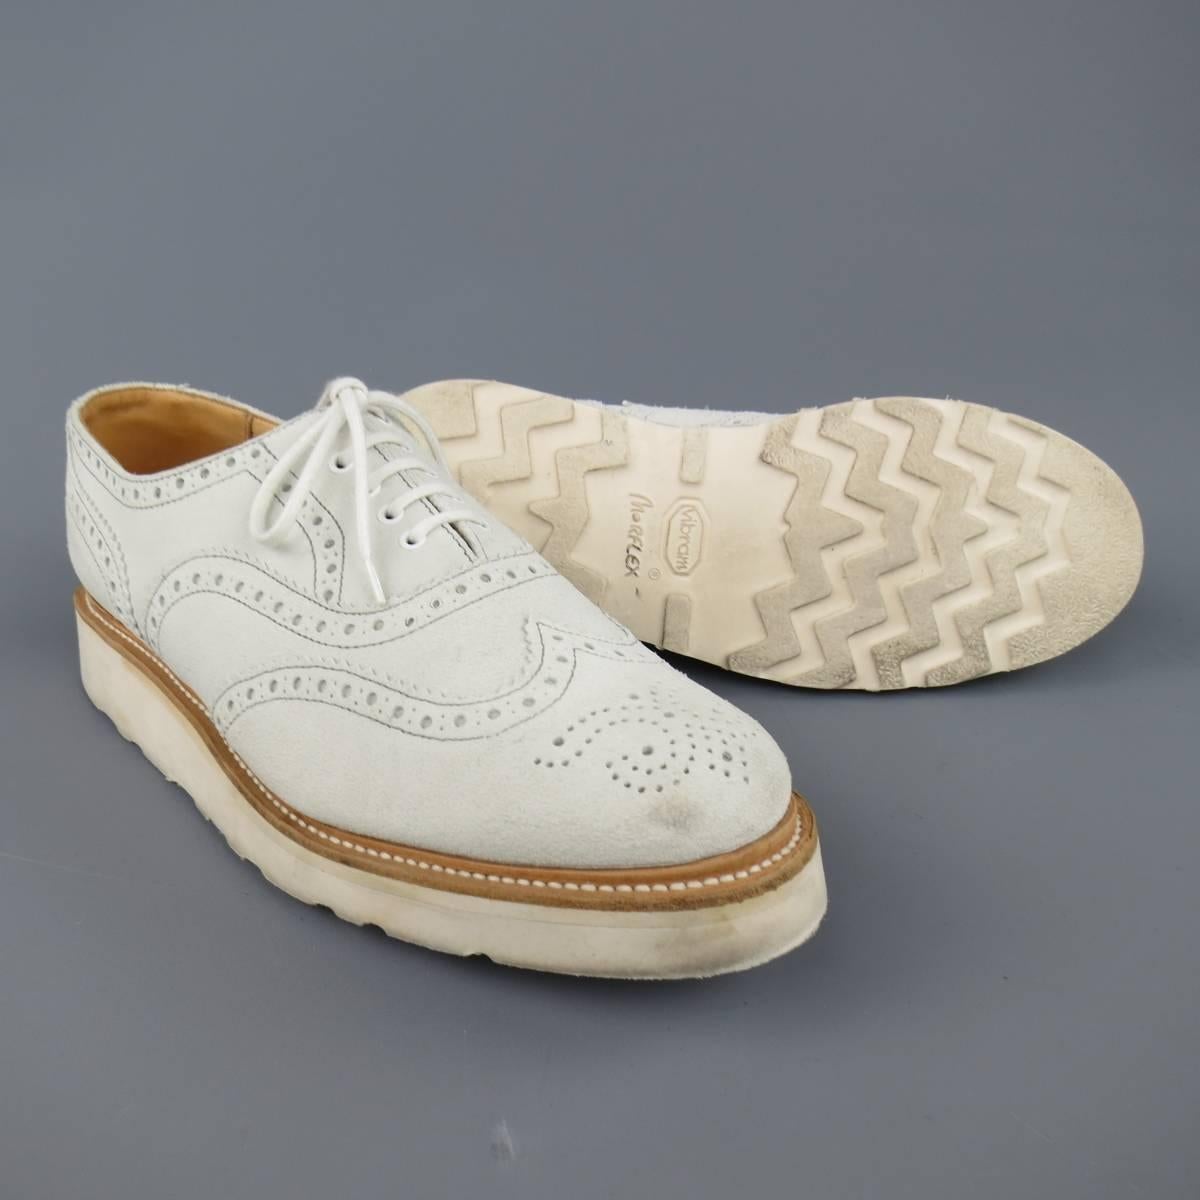 HERITAGE RESEARCH brogues in an off white suede featuring a round toe with wingtip, perforated brogue details throughout, and thick Vibram sole. Wear throughout. Made in  England.
 
Good Pre-Owned Condition.
Marked: UK 8
 
Outsole: 12 X 4 in.
Sole: